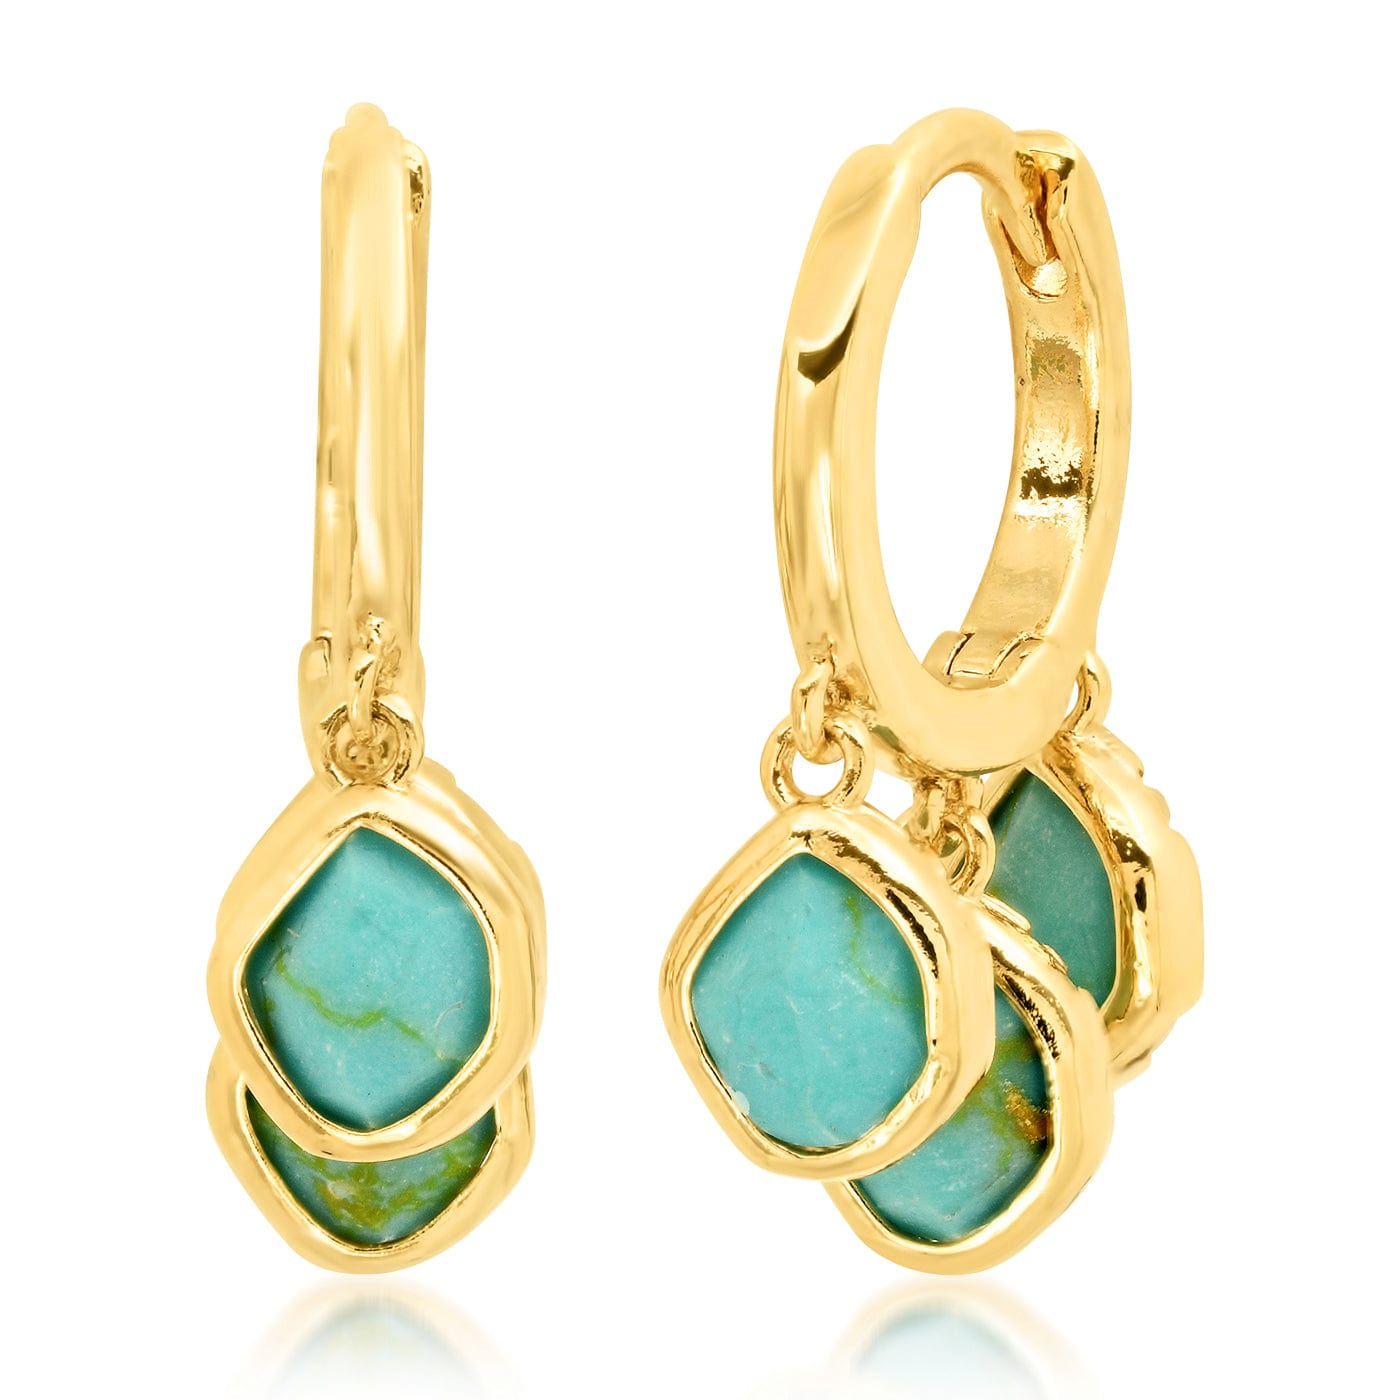 TAI JEWELRY Earrings Turquoise Gold Huggie with Rock Crystal Charms